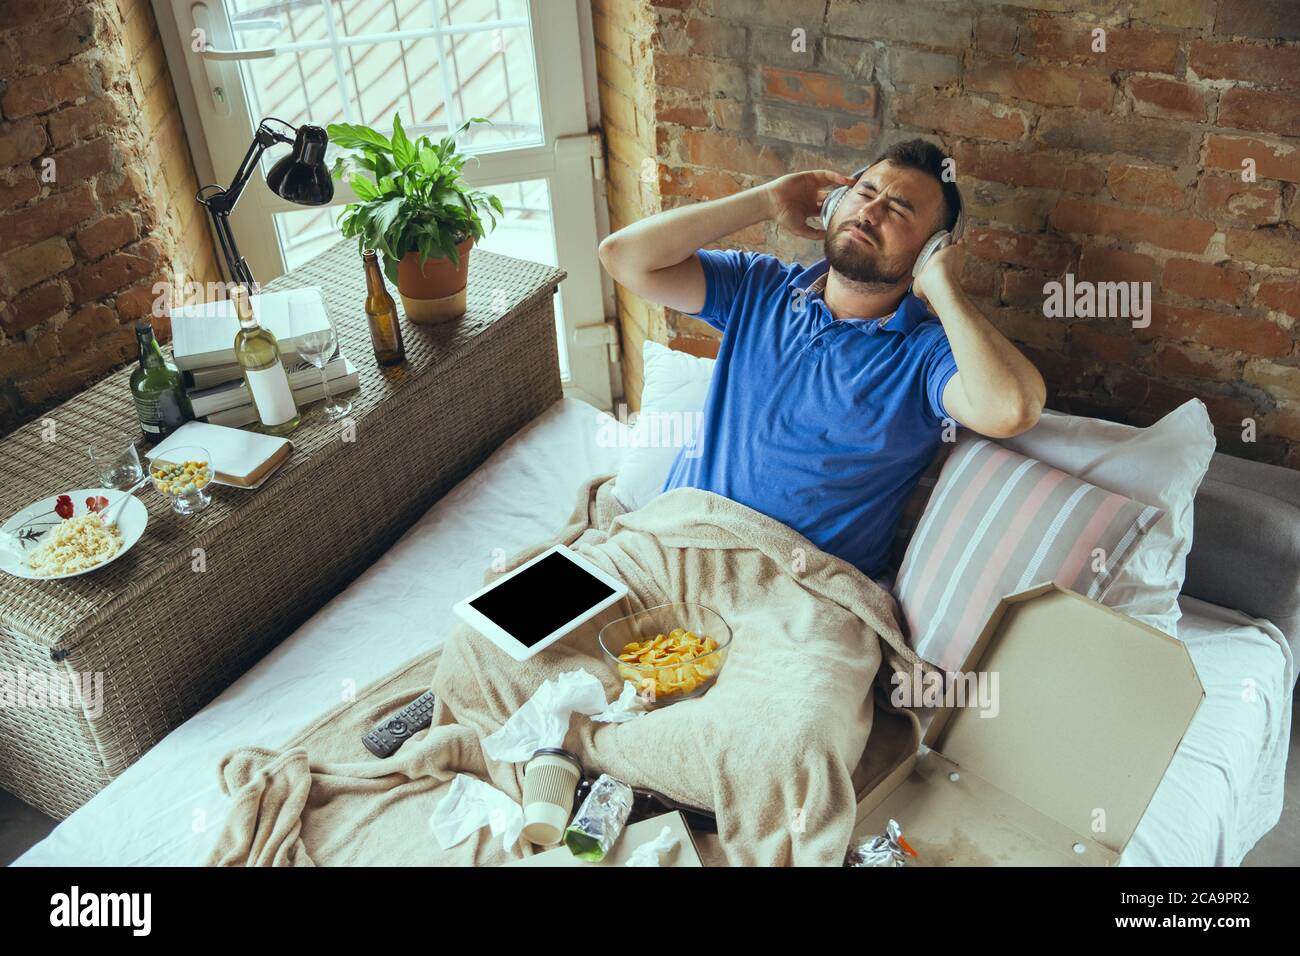 Joyful, inspired listening to music with headphones. Lazy man living in his bed surrounded with messy. No need to go out to be happy. Using gadgets, watching movie and series, emotional. Fast food. Stock Photo